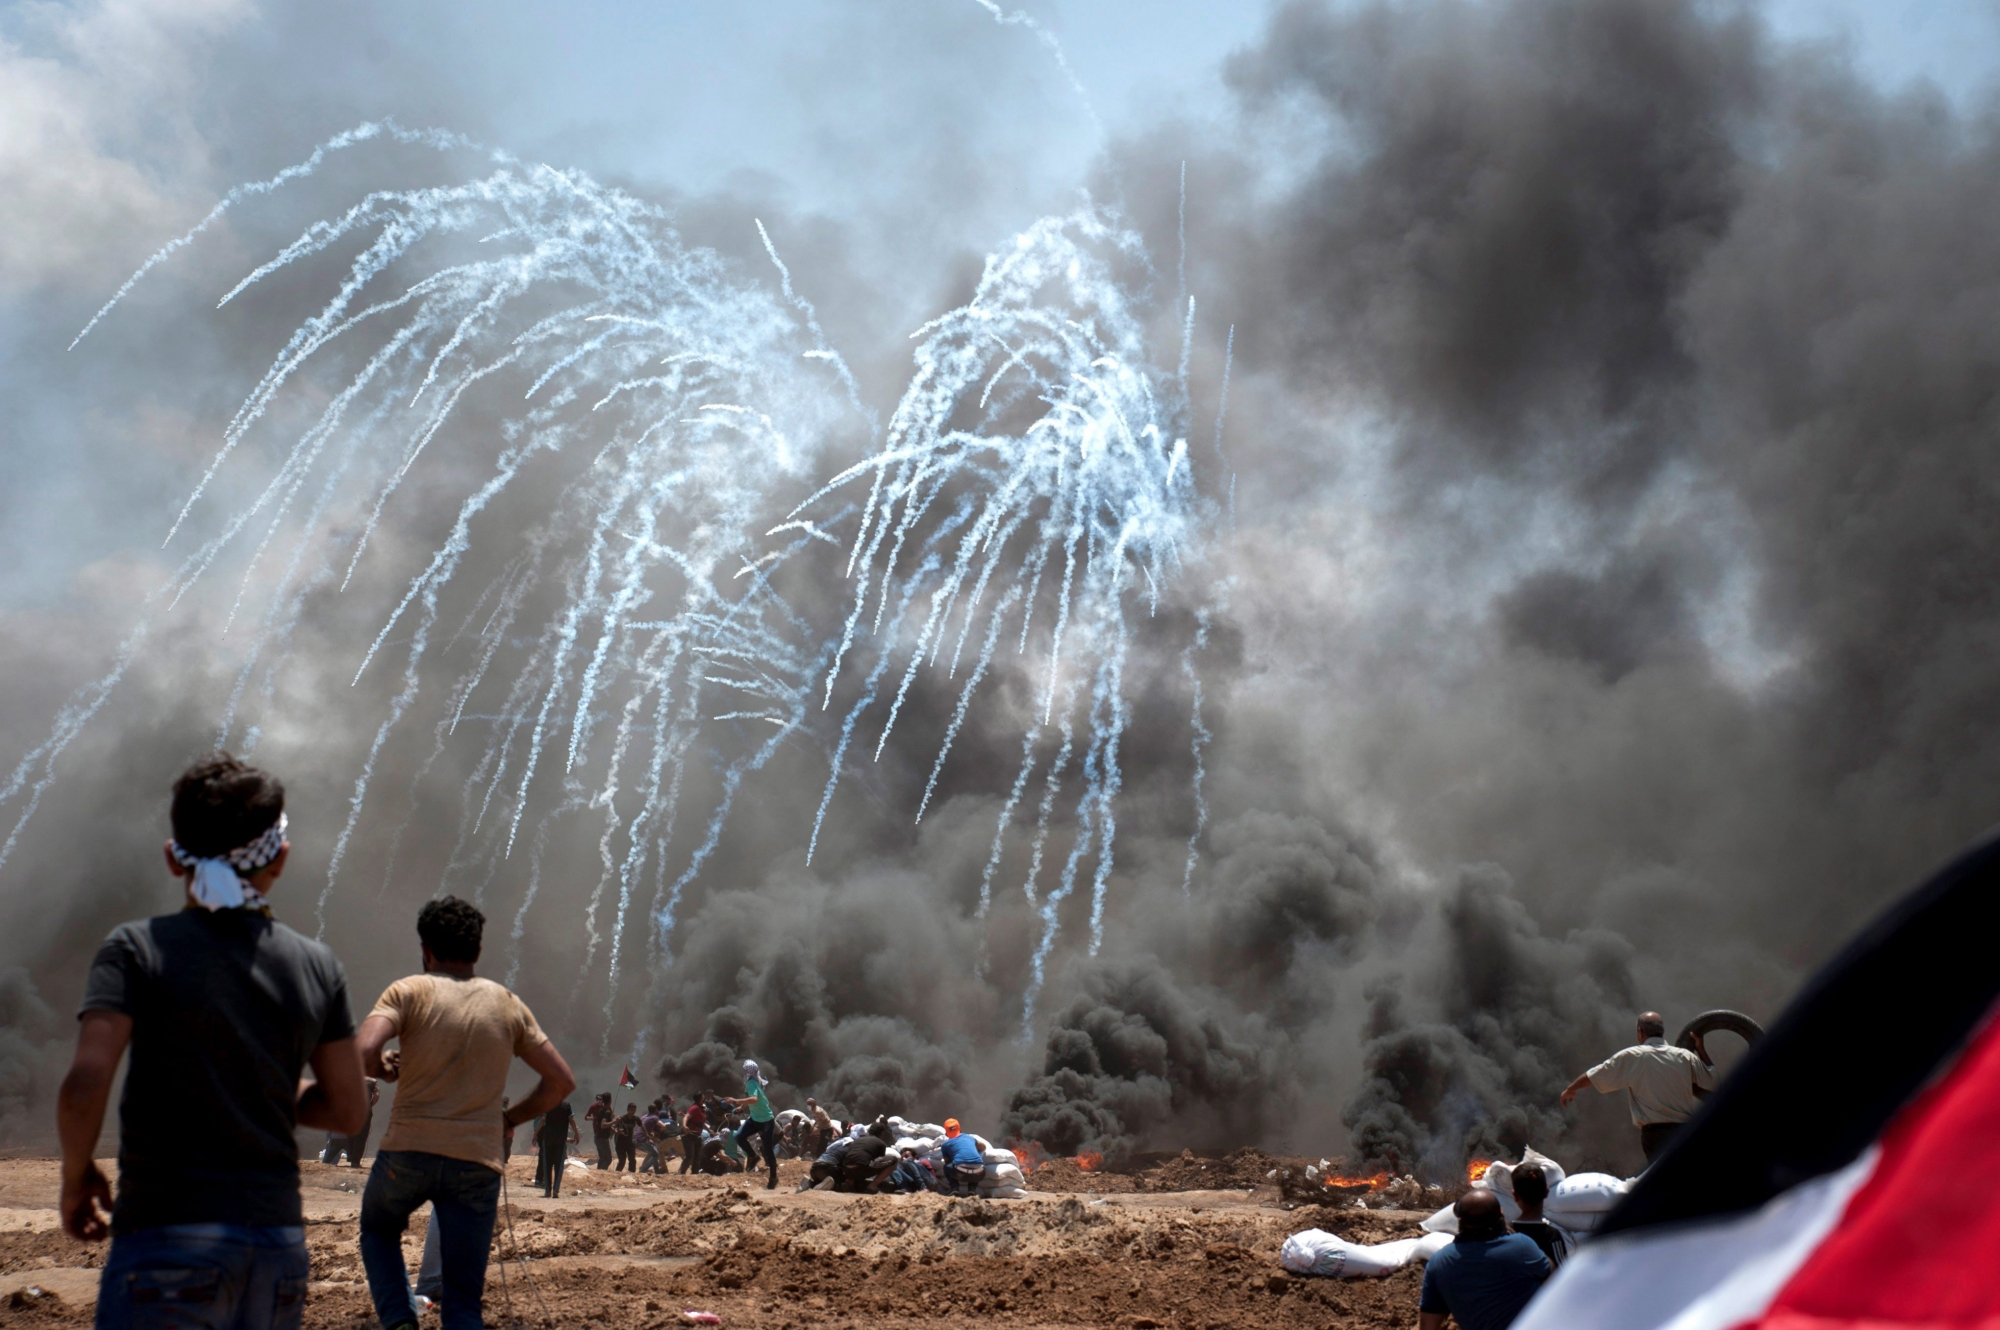 epa06735604 Israeli army throws tear gas during Palestinian demonstrators during a protest against the US Embassy move to Jerusalem and ahead of the 70th anniversary of Nakba, at the Gaza-Israeli border, in Abu Safia, Gaza Strip, 14 May 2018. Palestinians are marking the Nakba Day, or the day of the disaster, when more than 700 thousand Palestinians were forcefully expelled from their villages during the war that led to the creation of the state of Israel on 15 May 1948. Protesters call for the right of Palestinians to return to their homeland.  EPA/LUCA PIERGIOVANNI MIDEAST PALESTINIANS ISRAEL GAZA PROTEST